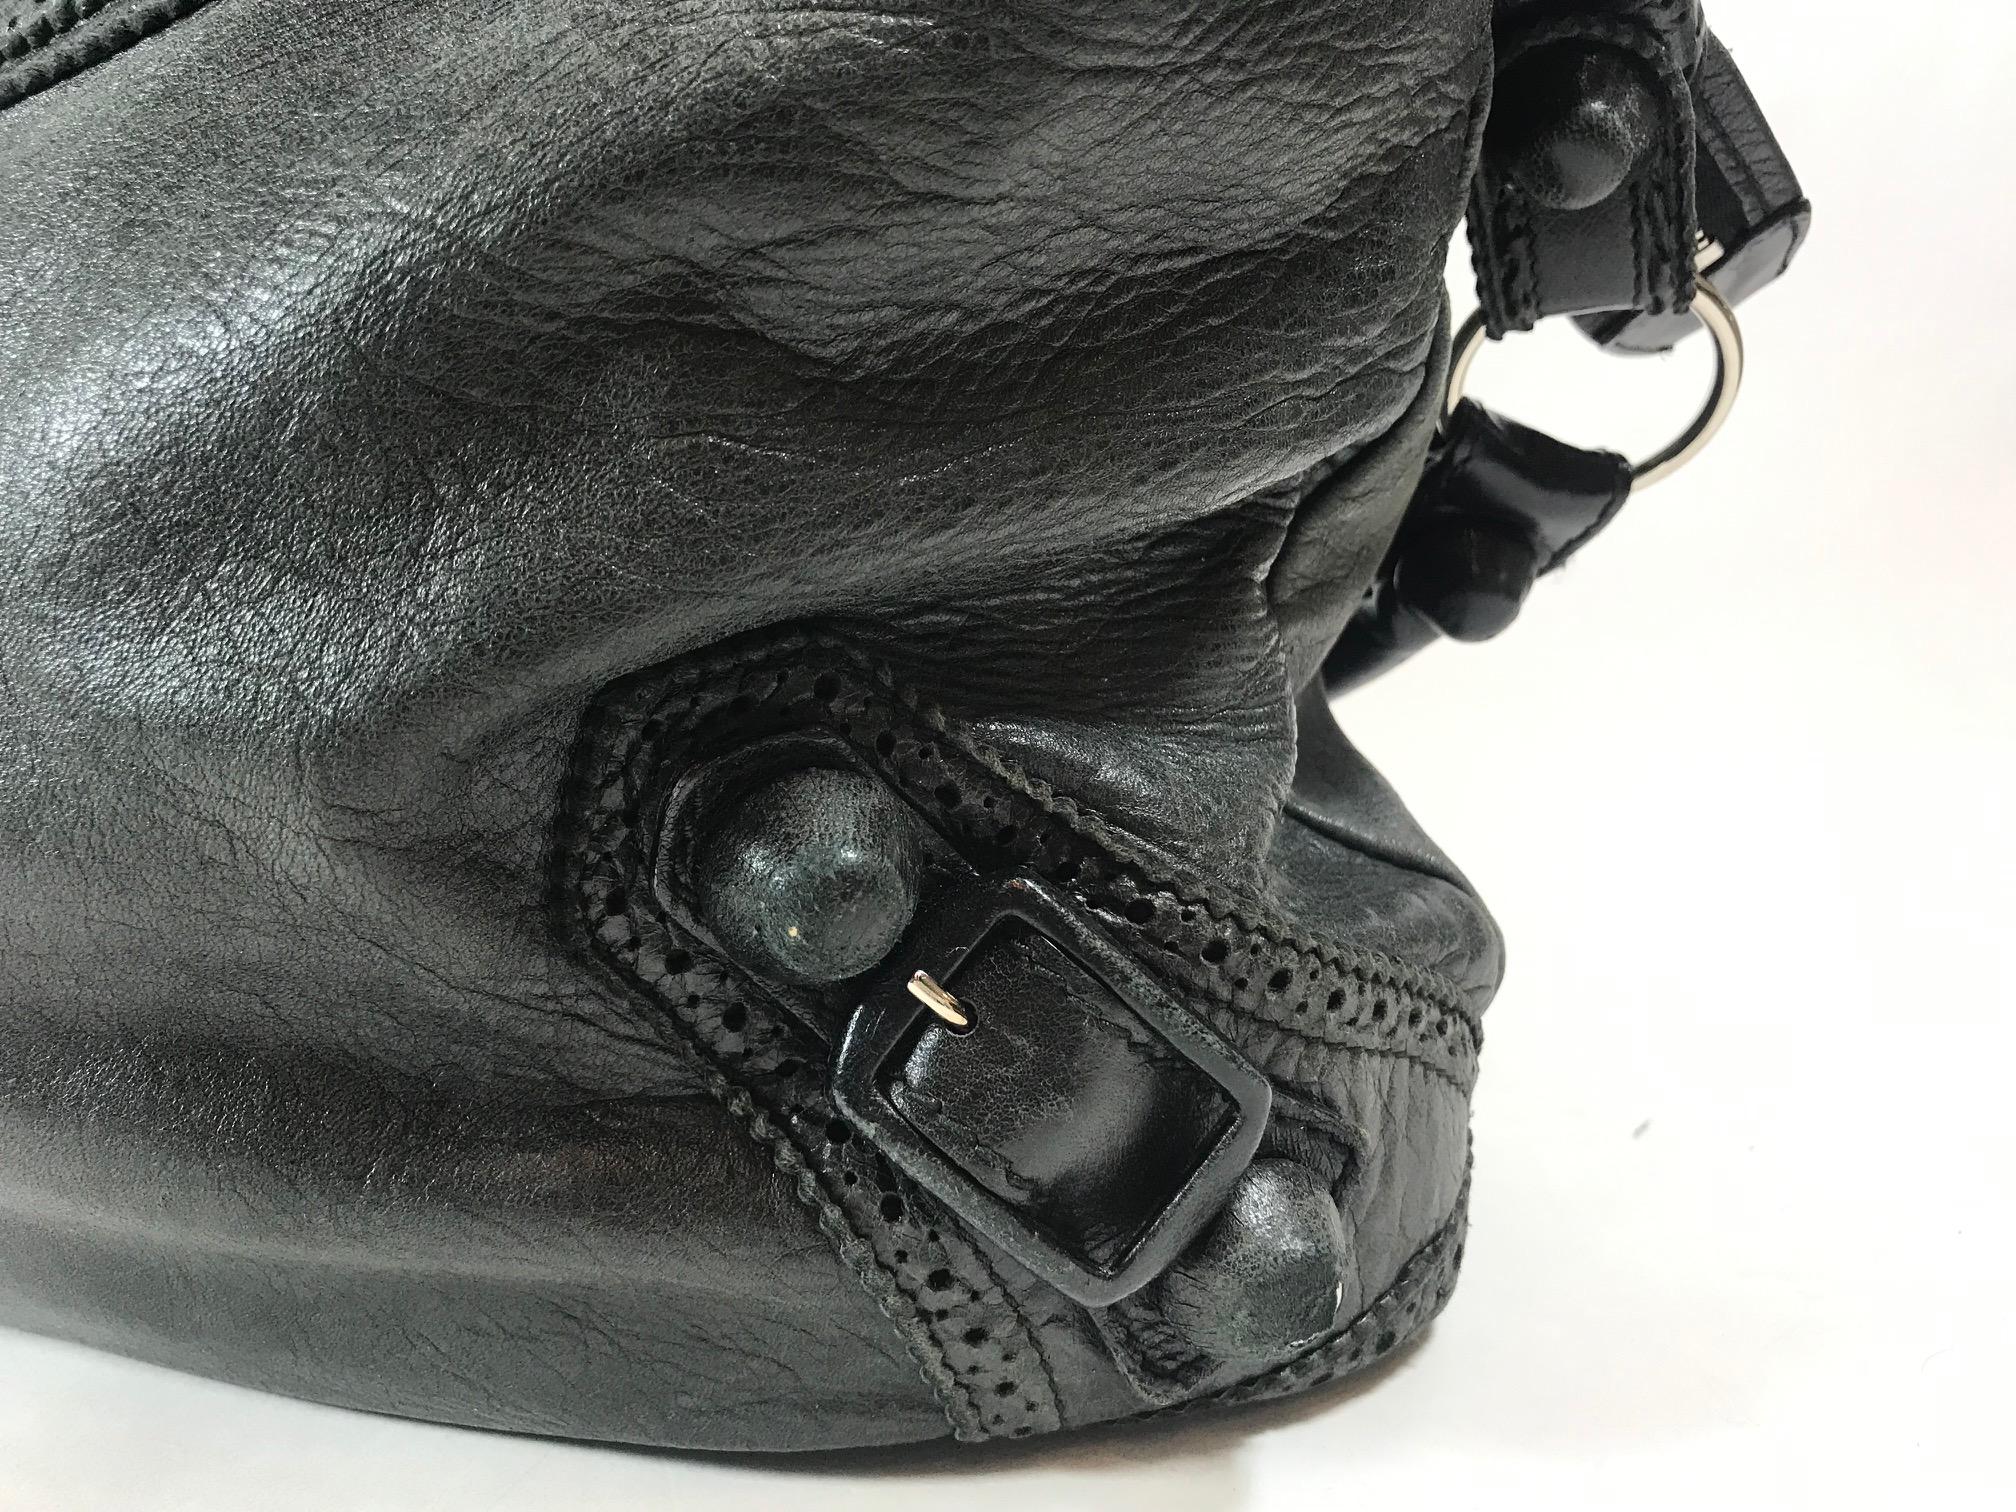 Balenciaga Motocross Giant Covered Brogues Day Bag In Good Condition For Sale In Roslyn, NY